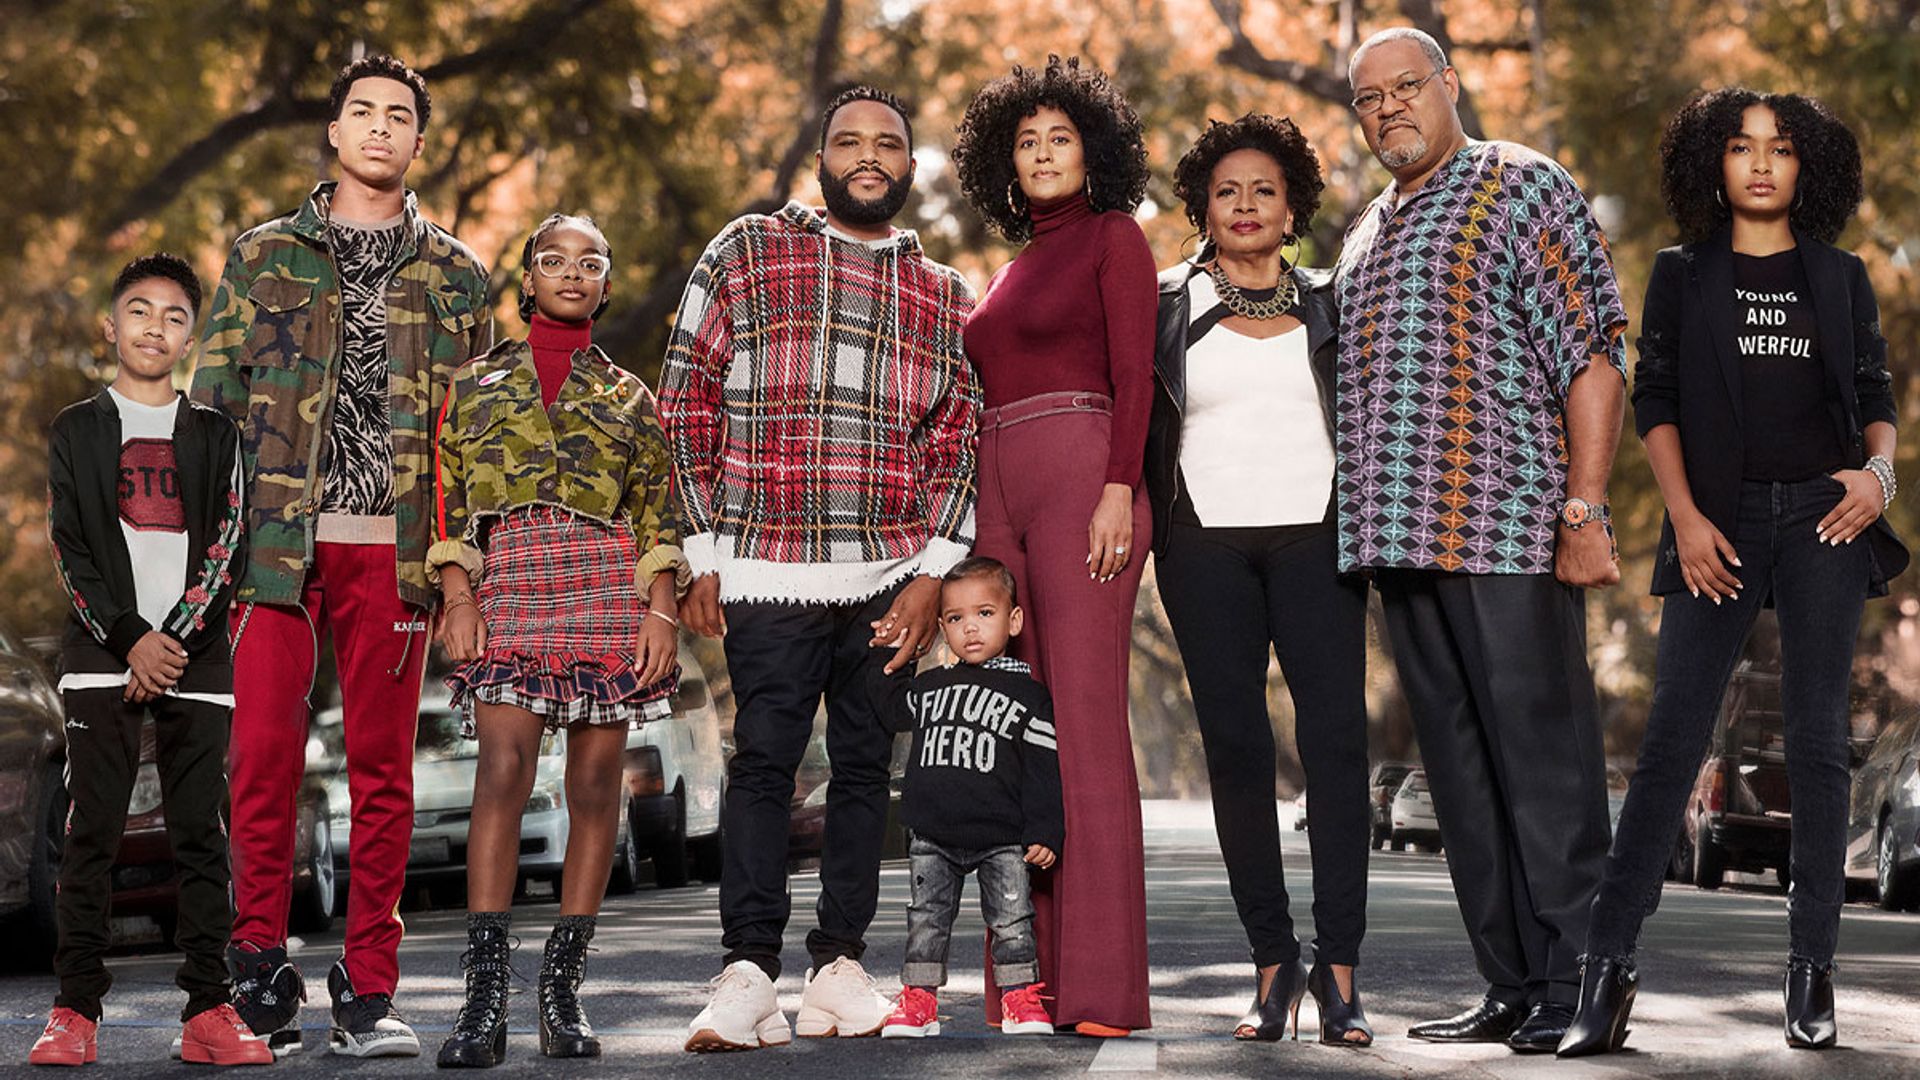 Black-ish: why is the Tracee Ellis Ross comedy ending after eight seasons?